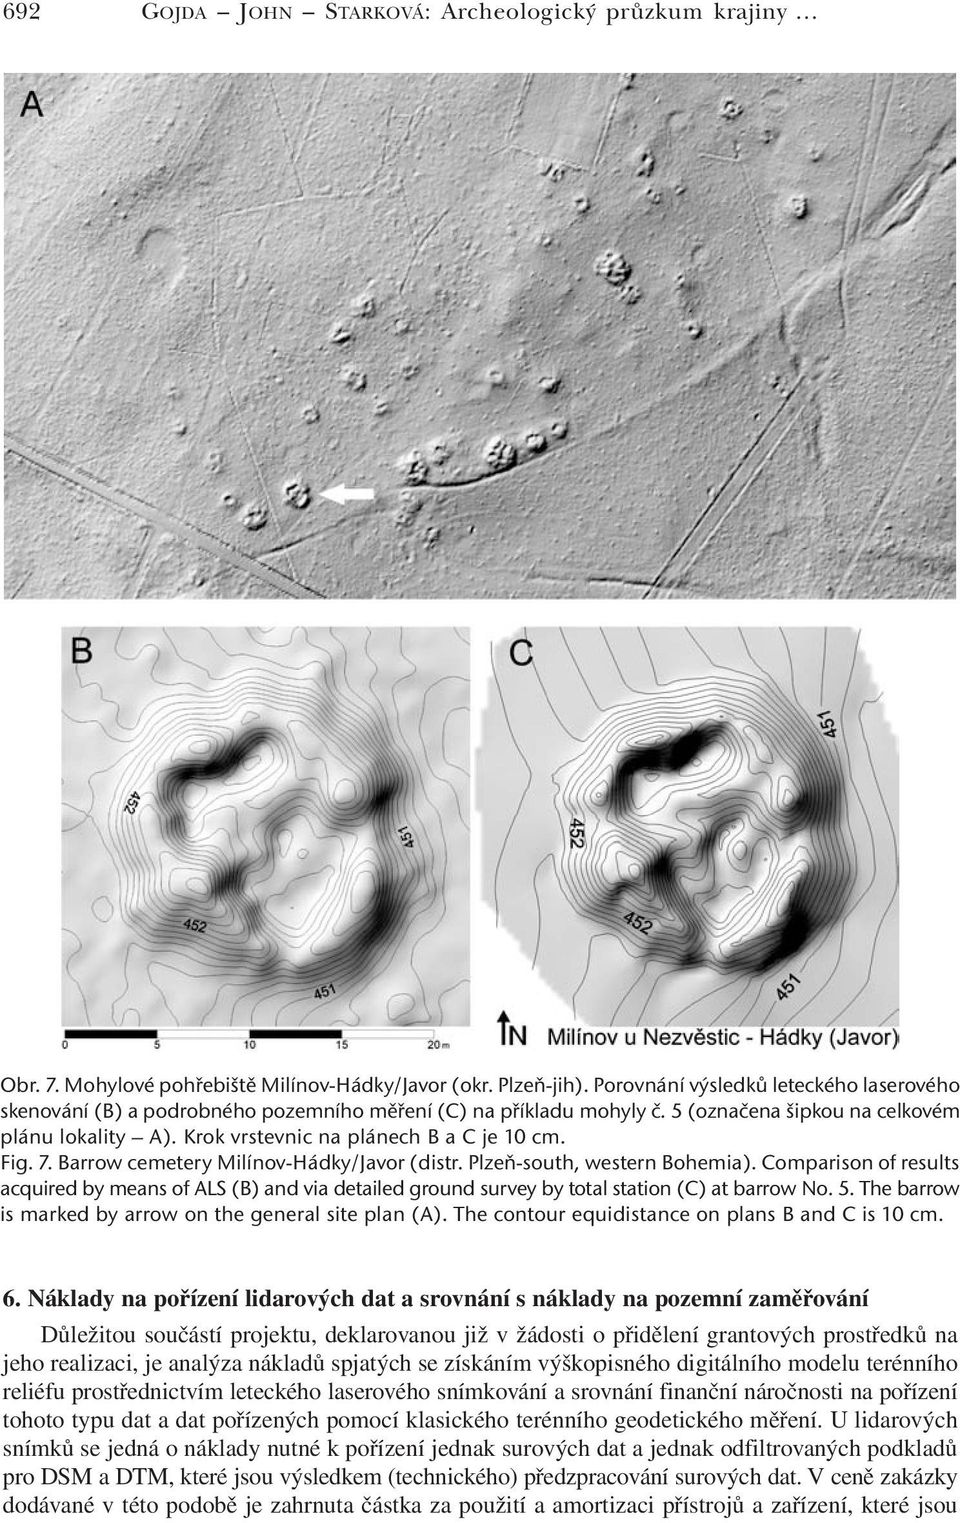 Fig. 7. Barrow cemetery Milínov-Hádky/Javor (distr. Plzeň-south, western Bohemia). Comparison of results acquired by means of ALS (B) and via detailed ground survey by total station (C) at barrow No.